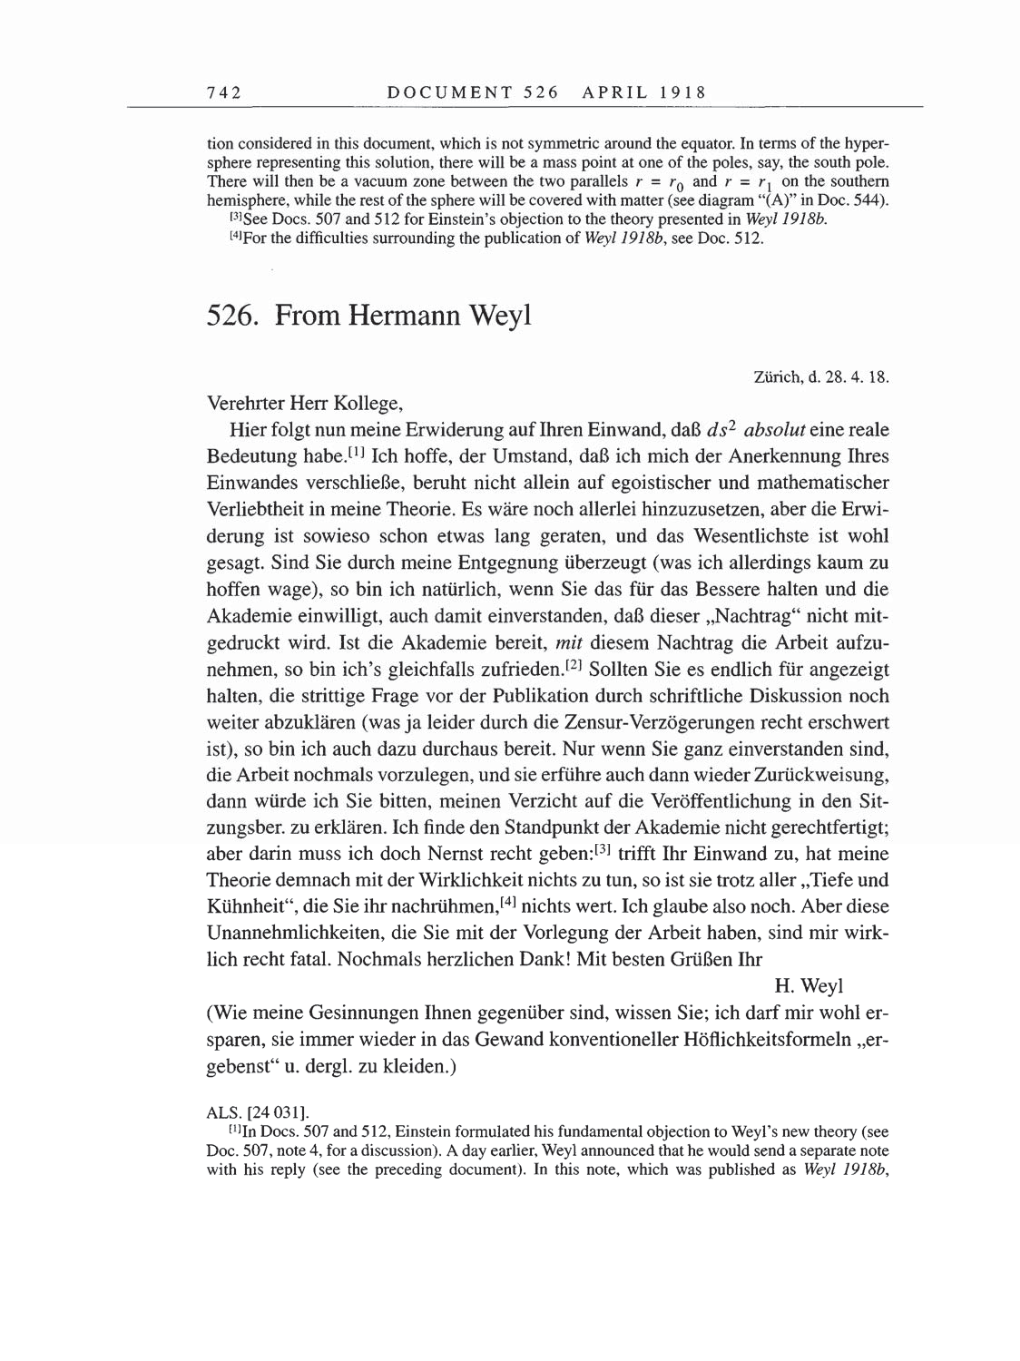 Volume 8, Part B: The Berlin Years: Correspondence 1918 page 742